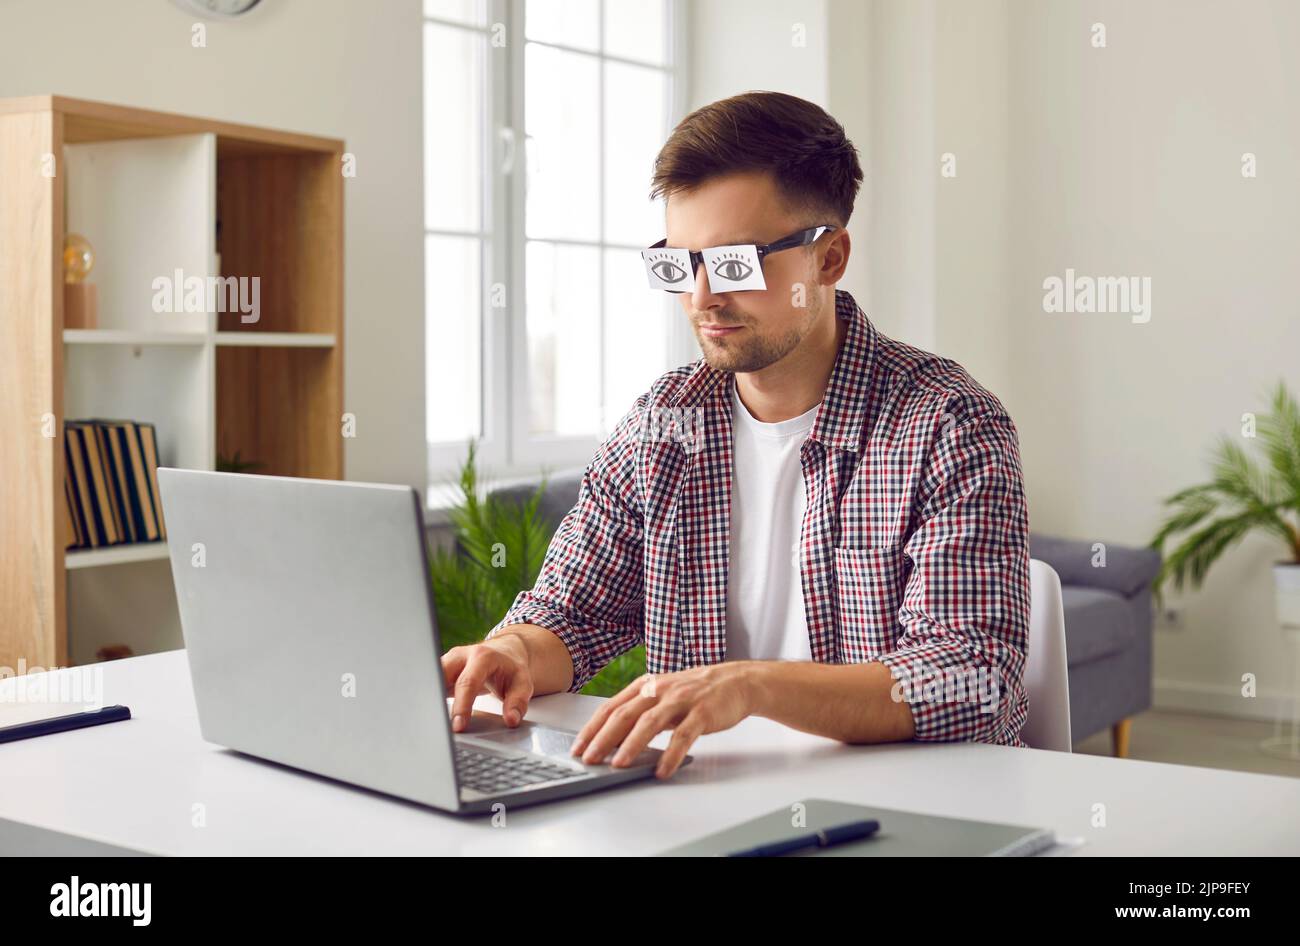 Tired sleepy man working on laptop and hiding his tiredness behind fake eye sticker glasses Stock Photo